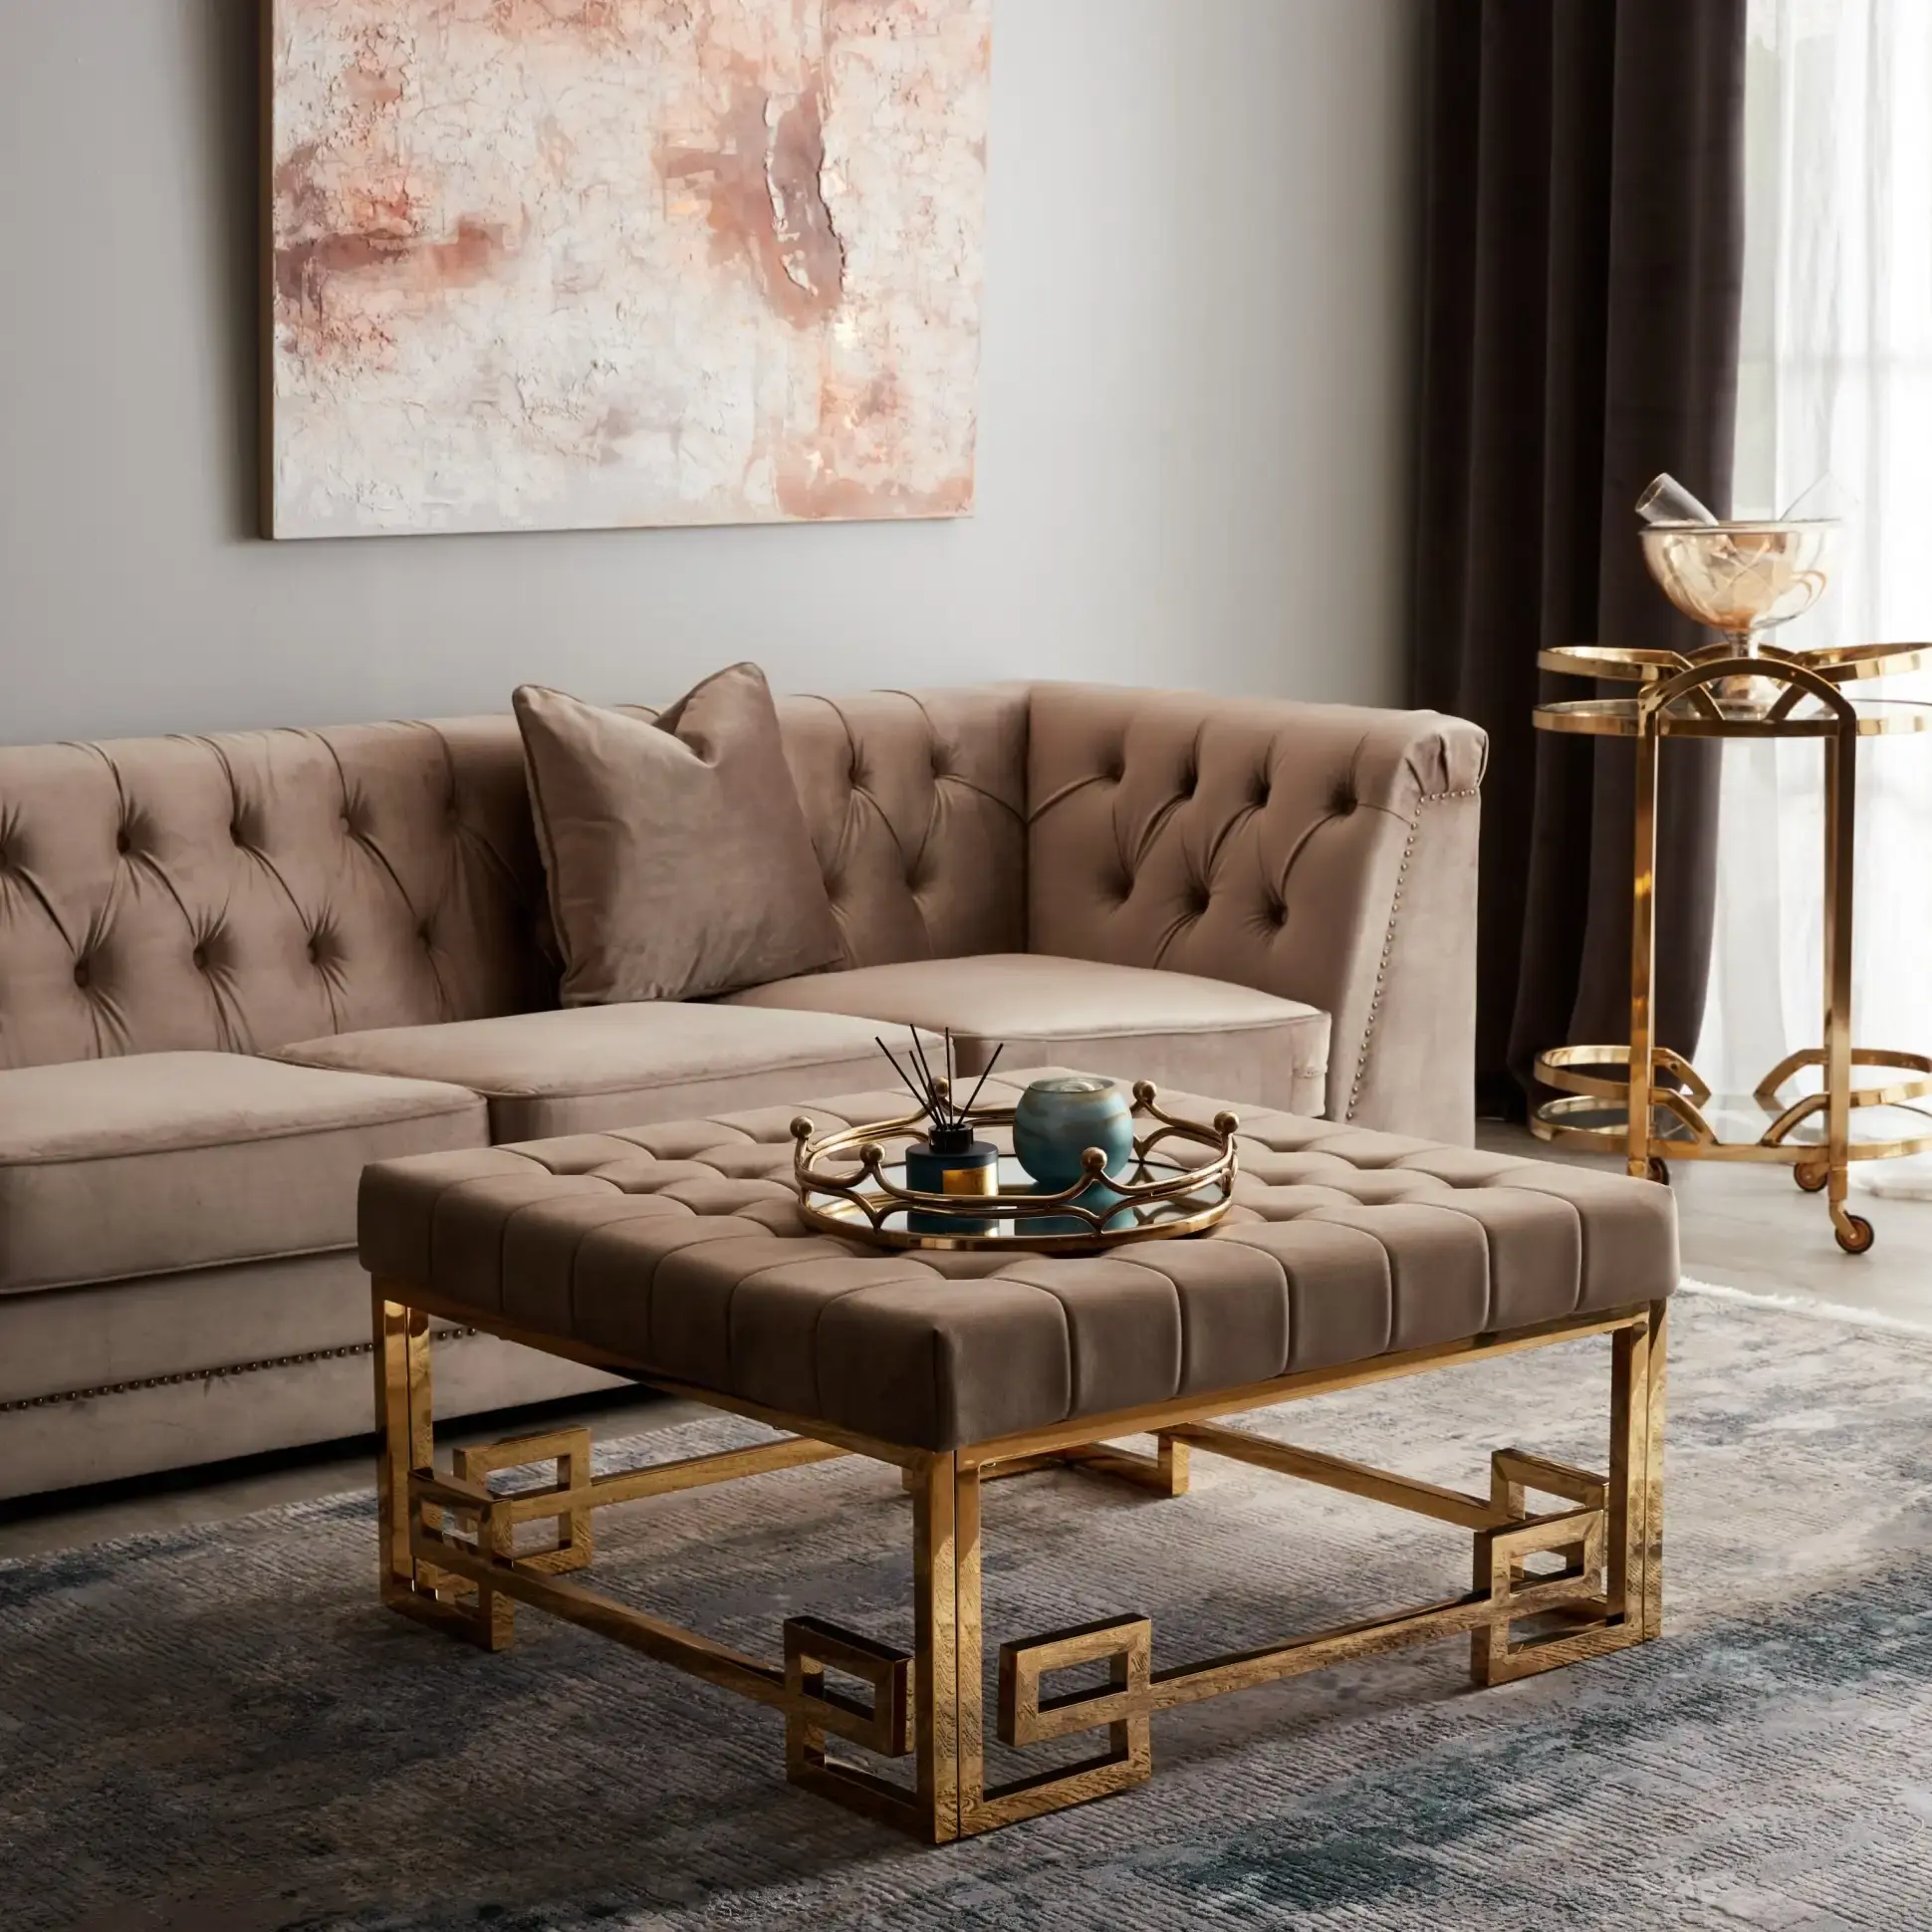 All About Velvet Furniture